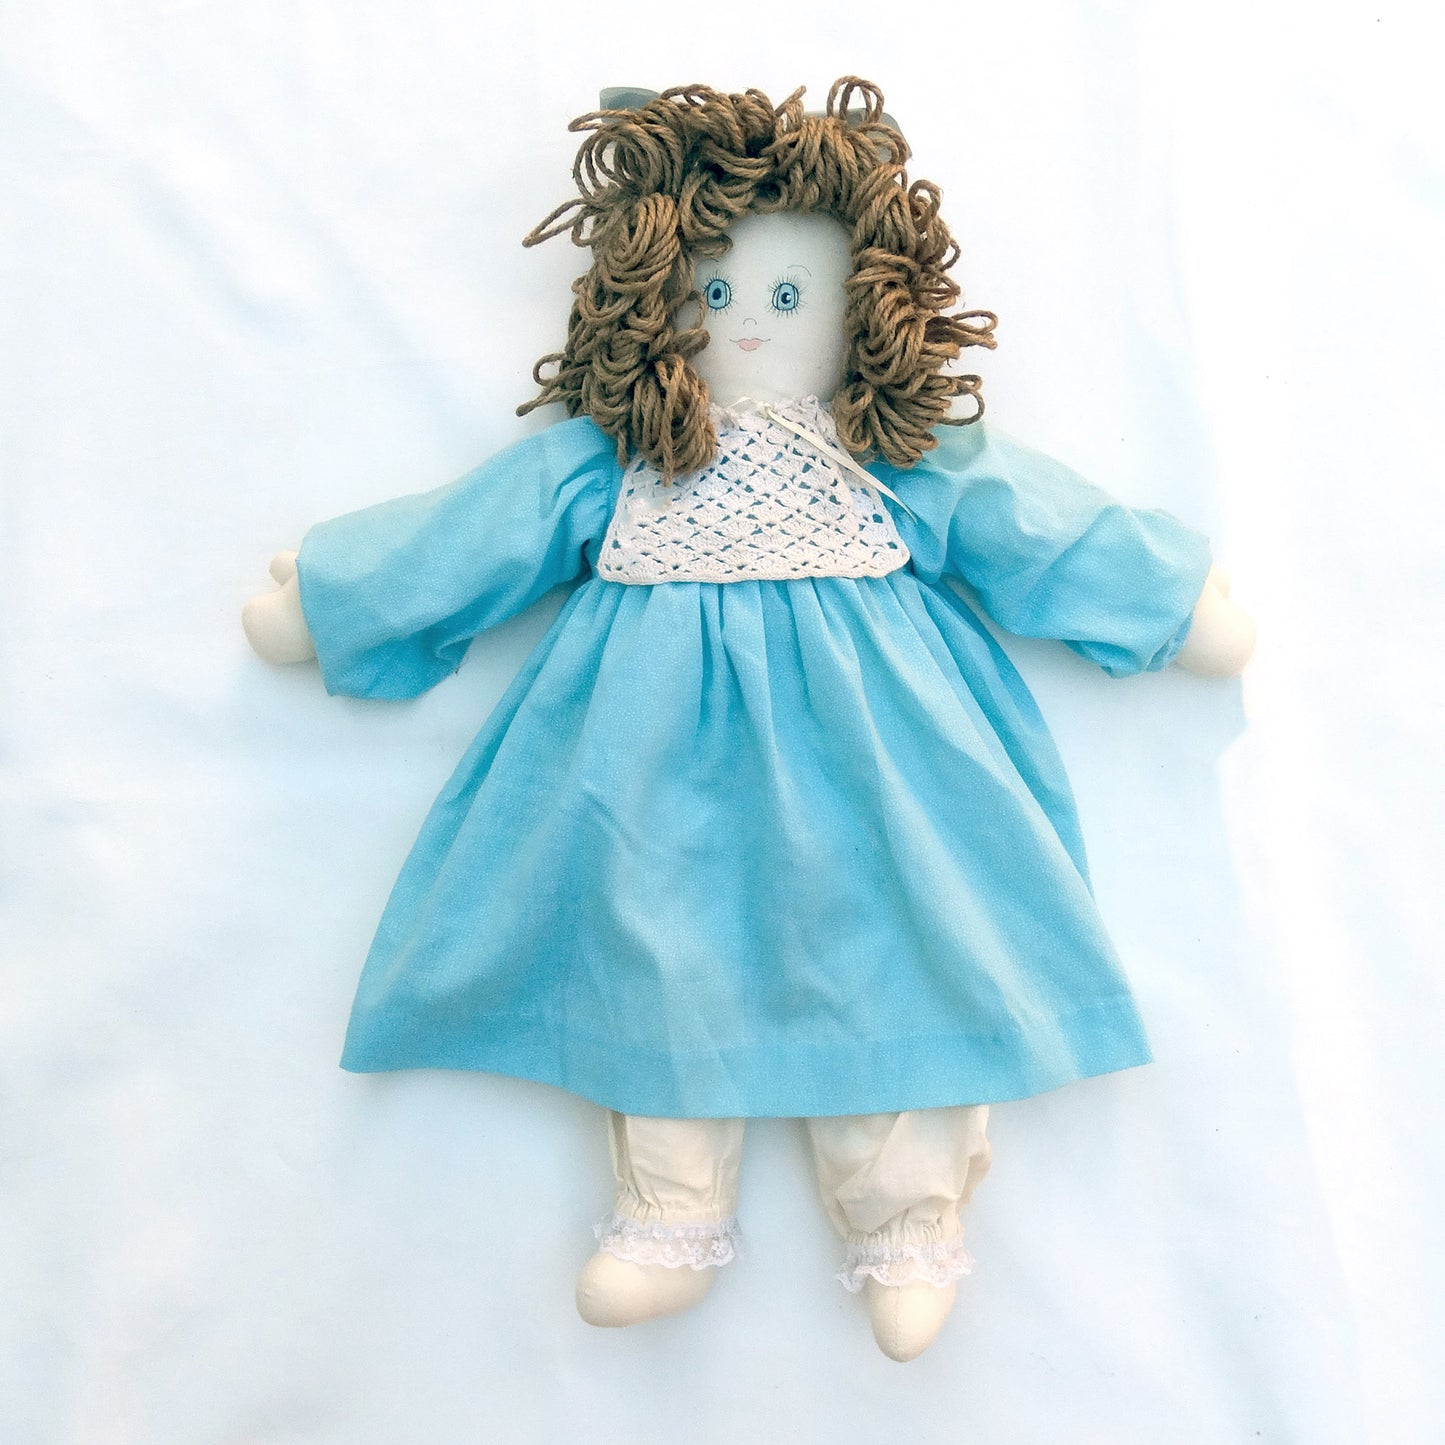 Ragamuffins-Hand-made-cloth-doll_-blue-eyes_full-view-3